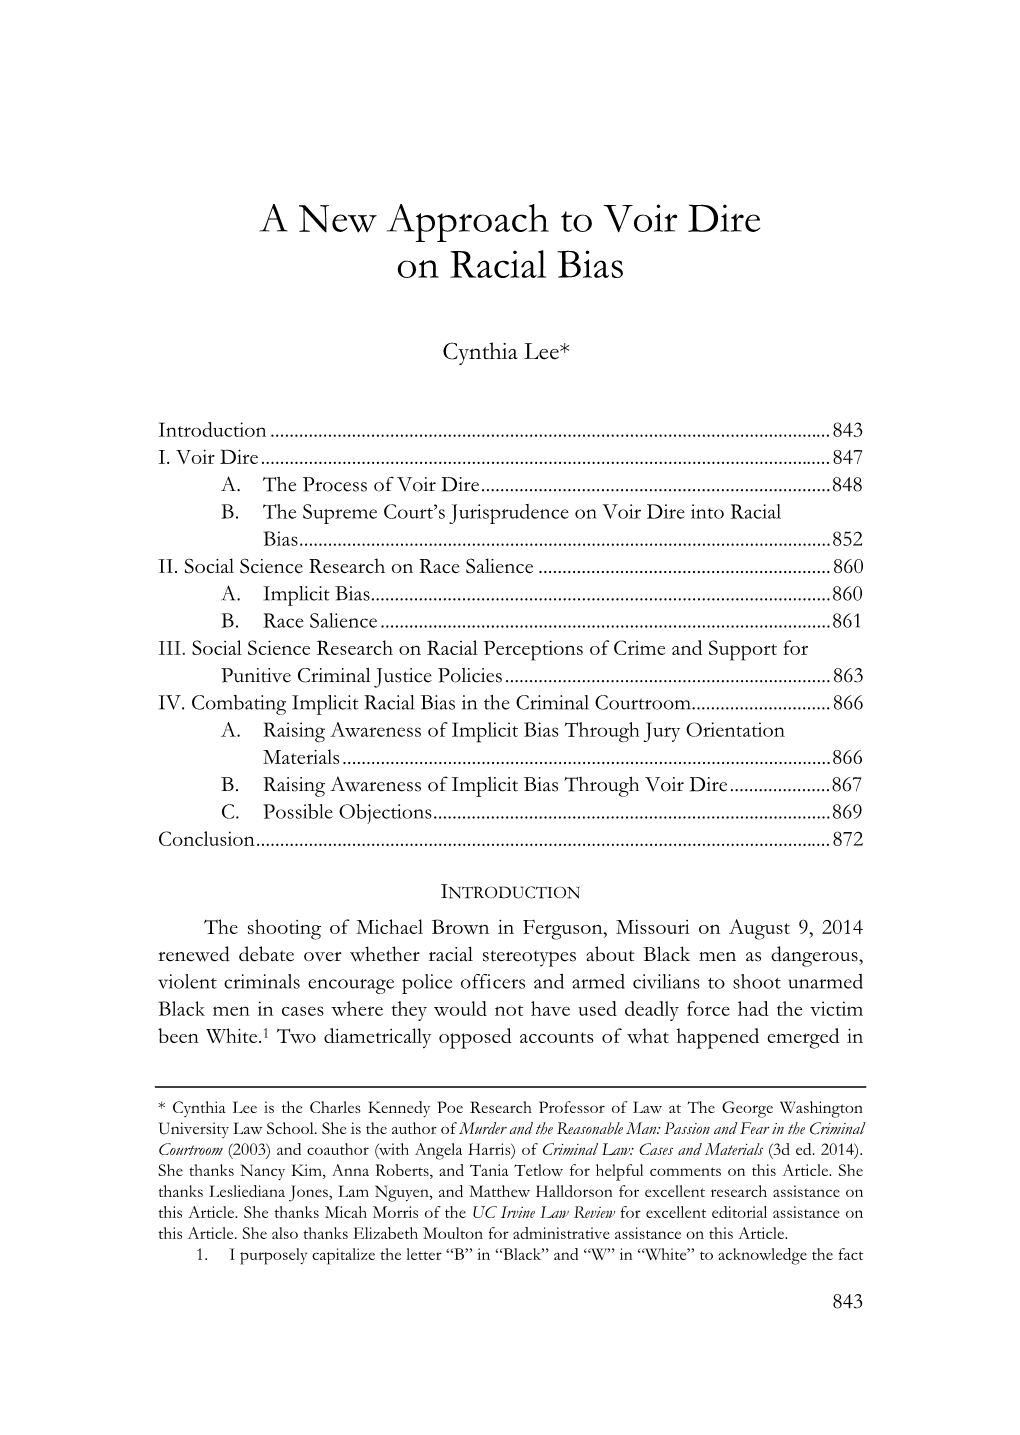 A New Approach to Voir Dire on Racial Bias